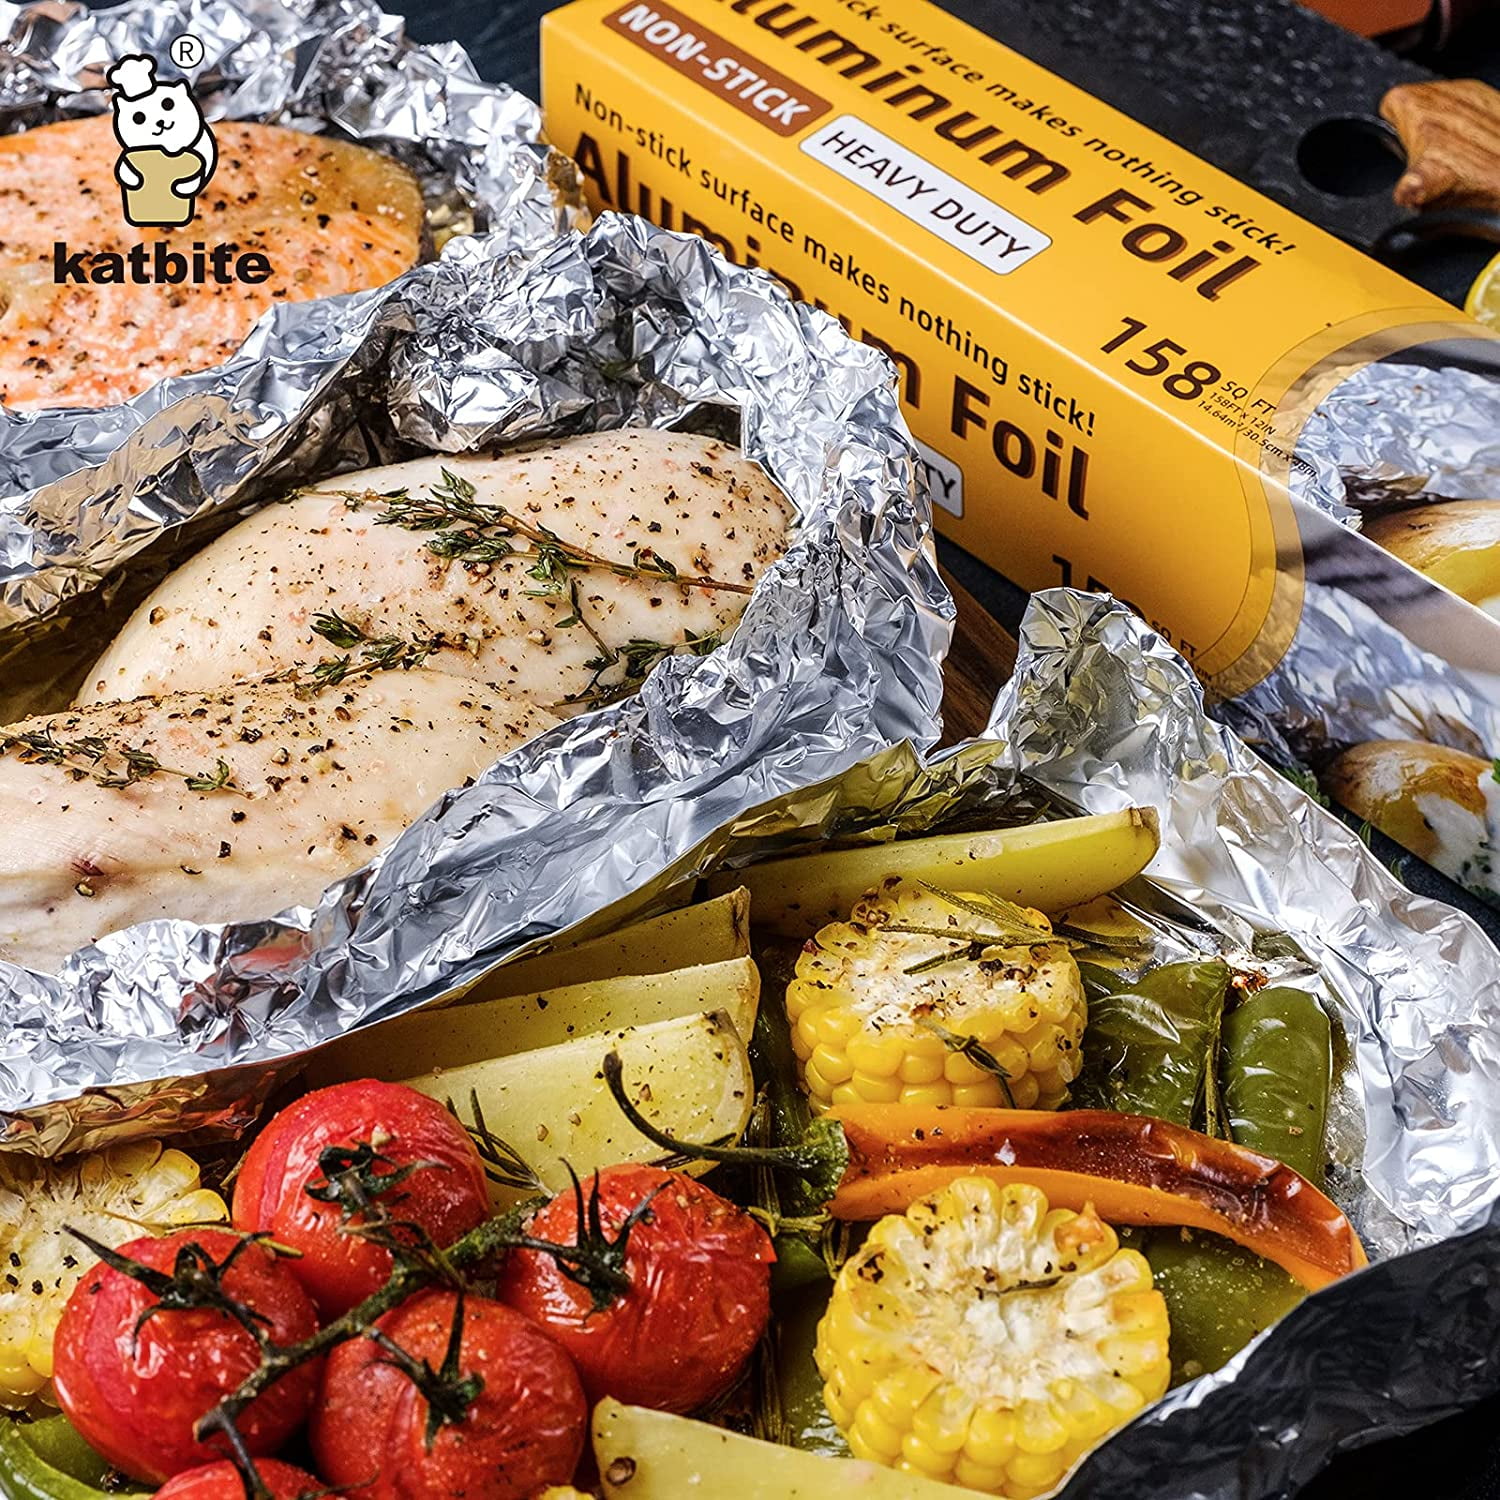  Lineslife Aluminum Foil Roll, 12”x328 Sq Ft Heavy Duty Non-Stick  Aluminum Foil Wrap with Sturdy Corrugated Cutter Box for Cooking, Roasting,  BBQ, Baking : Health & Household